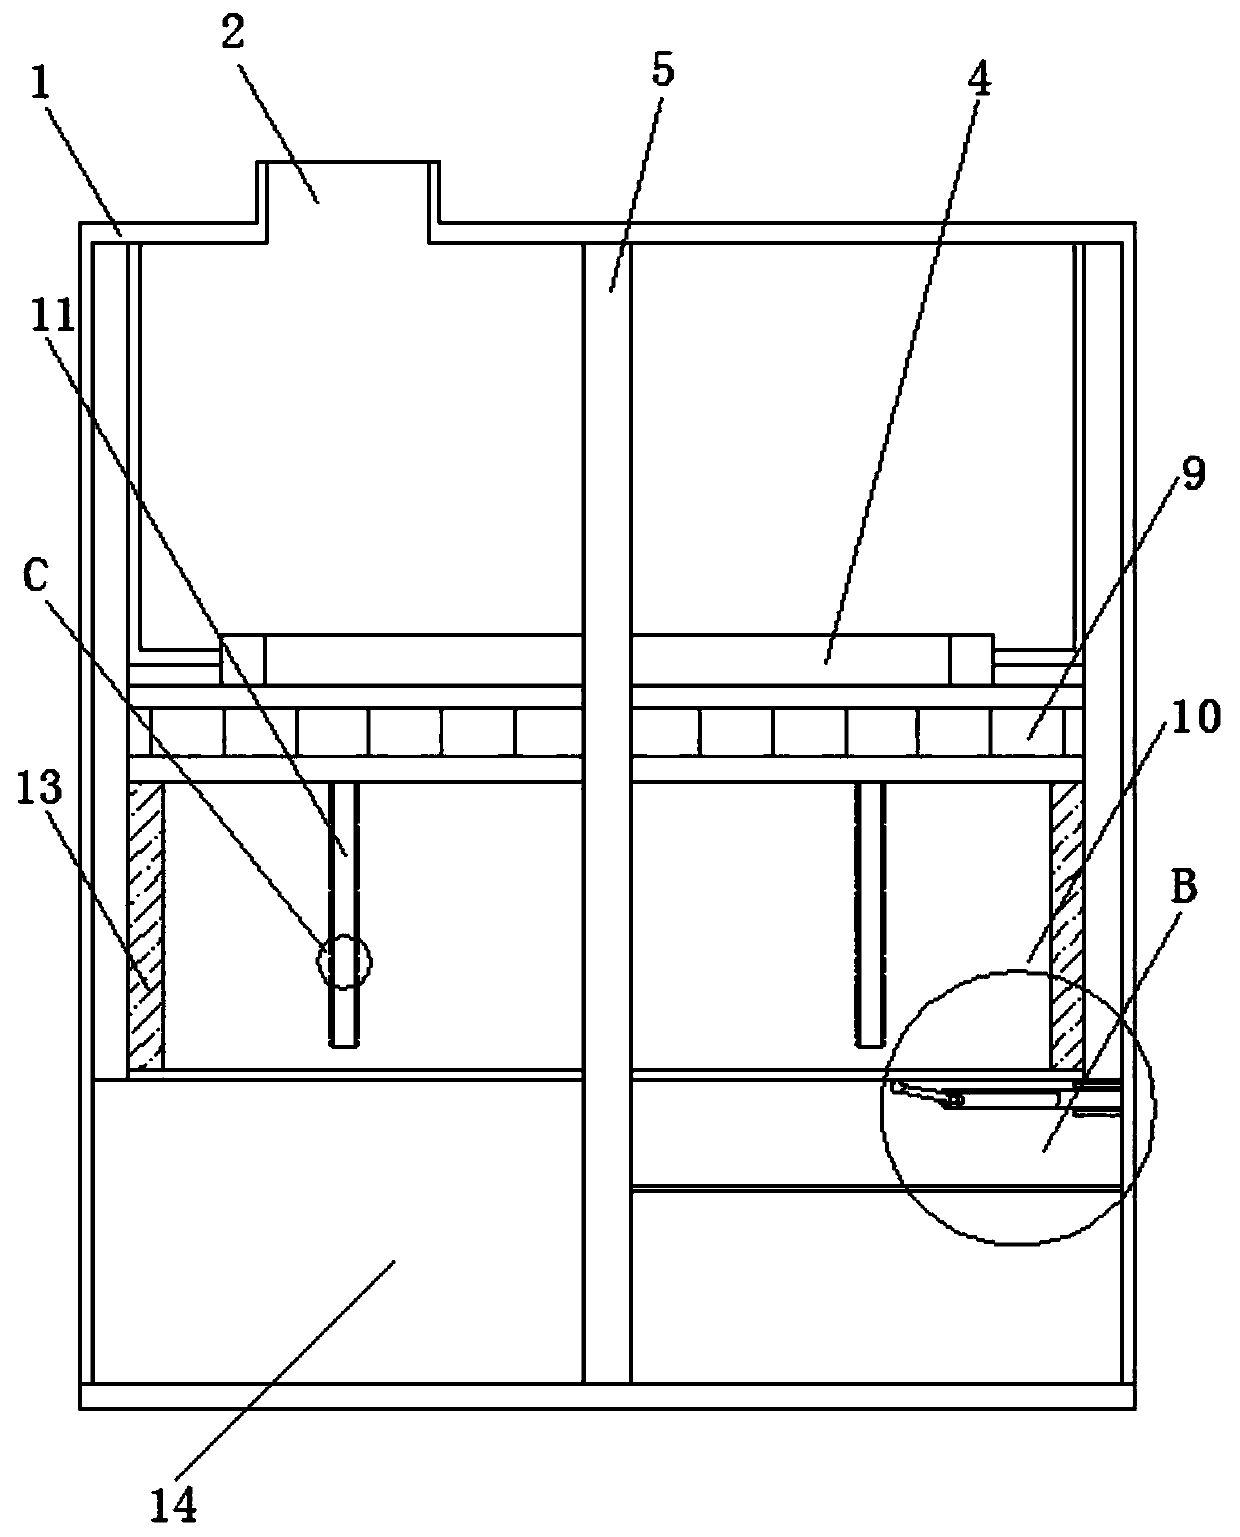 Processing treatment device for medical waste